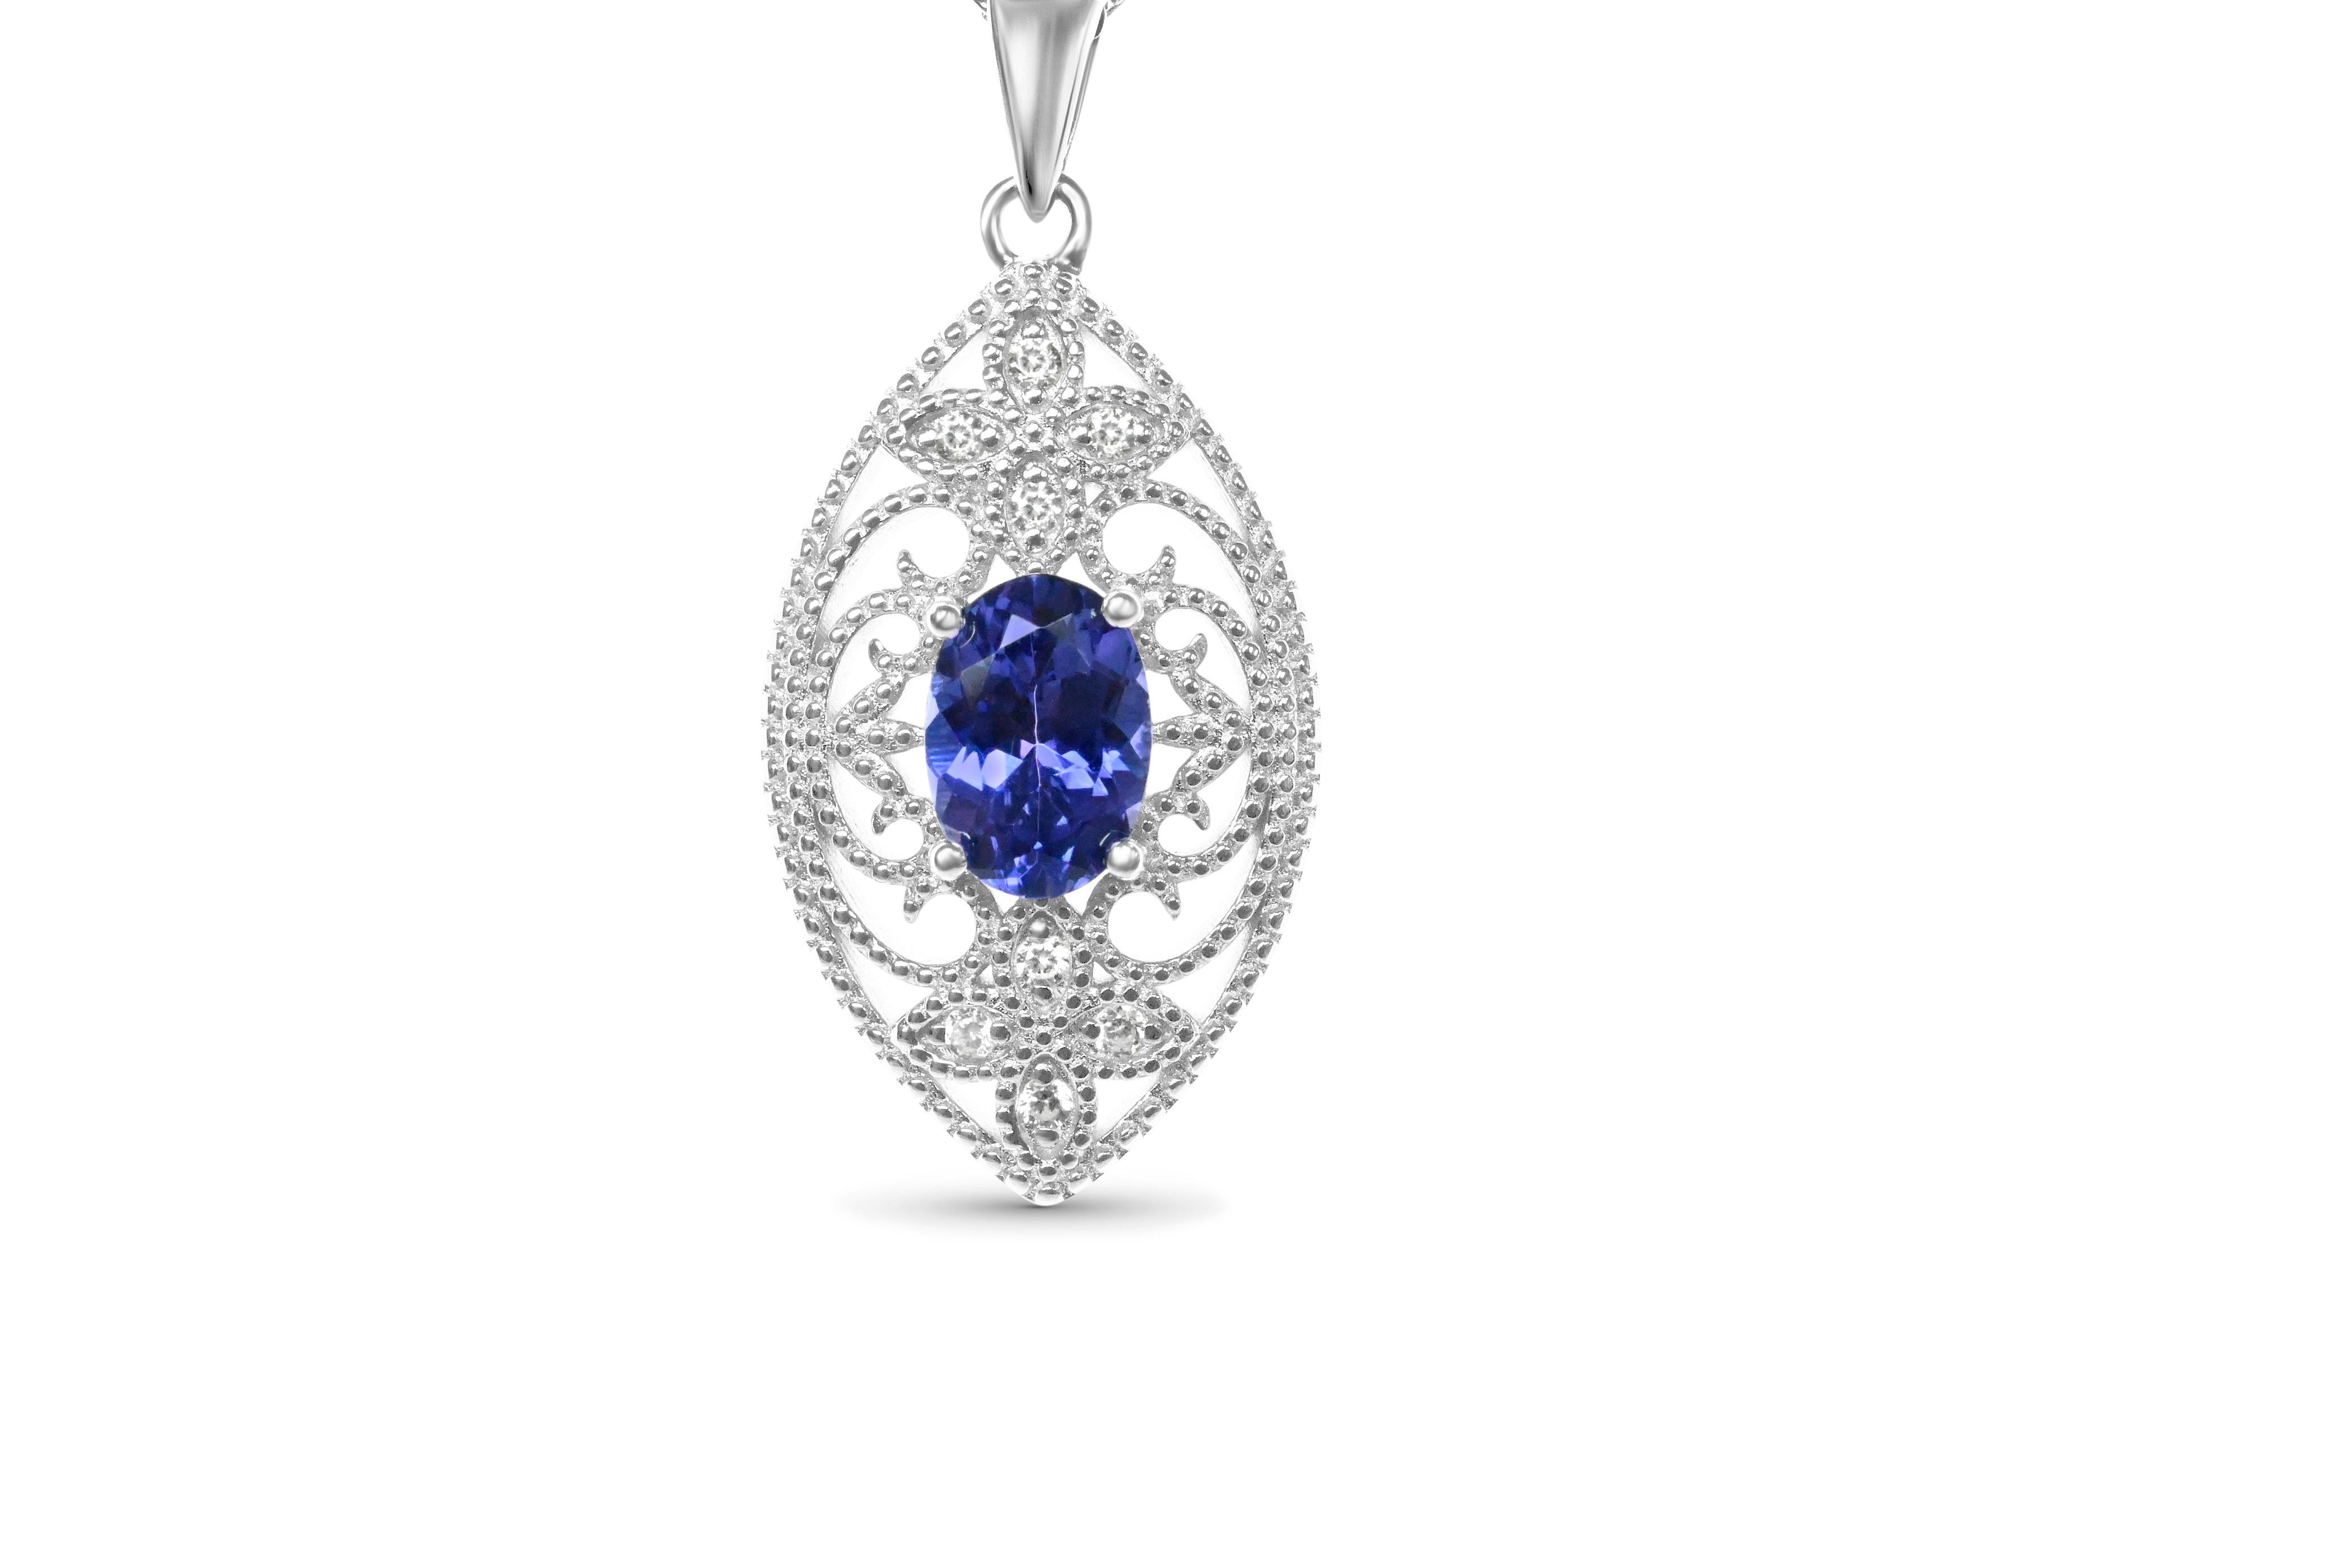 Tanzanite 925 Sterling Sliver Rhodium  Metal Platted Women's Pendant 0.86cts
Primary Stone : Tanzanite 
Stone Shape : 7 x 5mm Oval
Stone Weight ; 0.86cts
,Metal Weight :2.15g

Secondary Stone : White CZ
No of Stone : 8 pieces